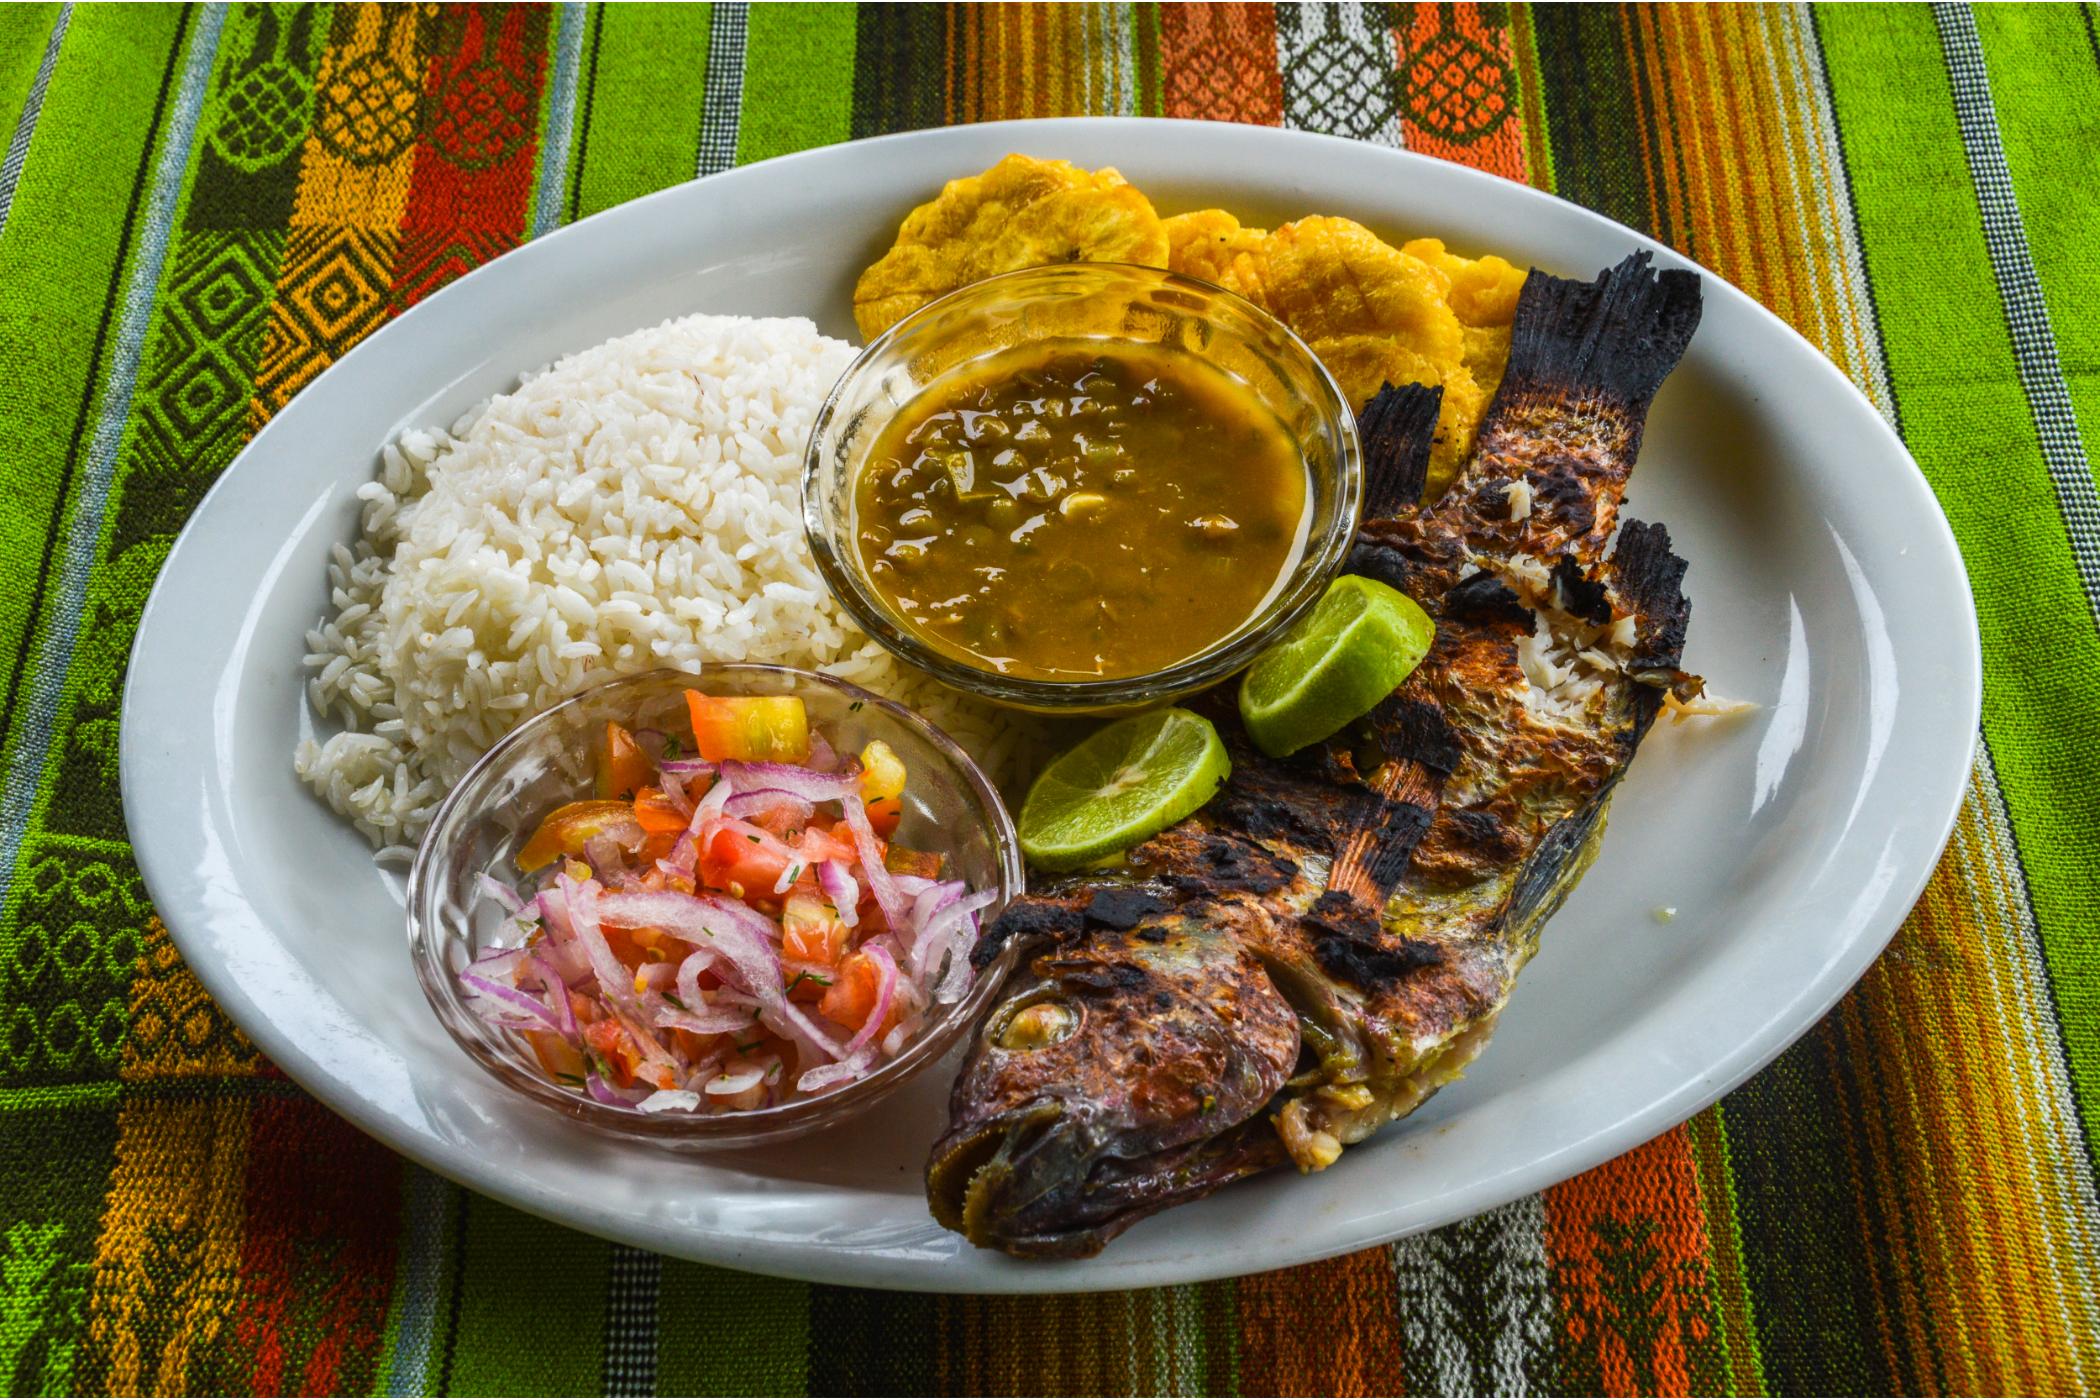 An Ecuadorian meal of grilled fish, plantains and rice. Photo: Canva.